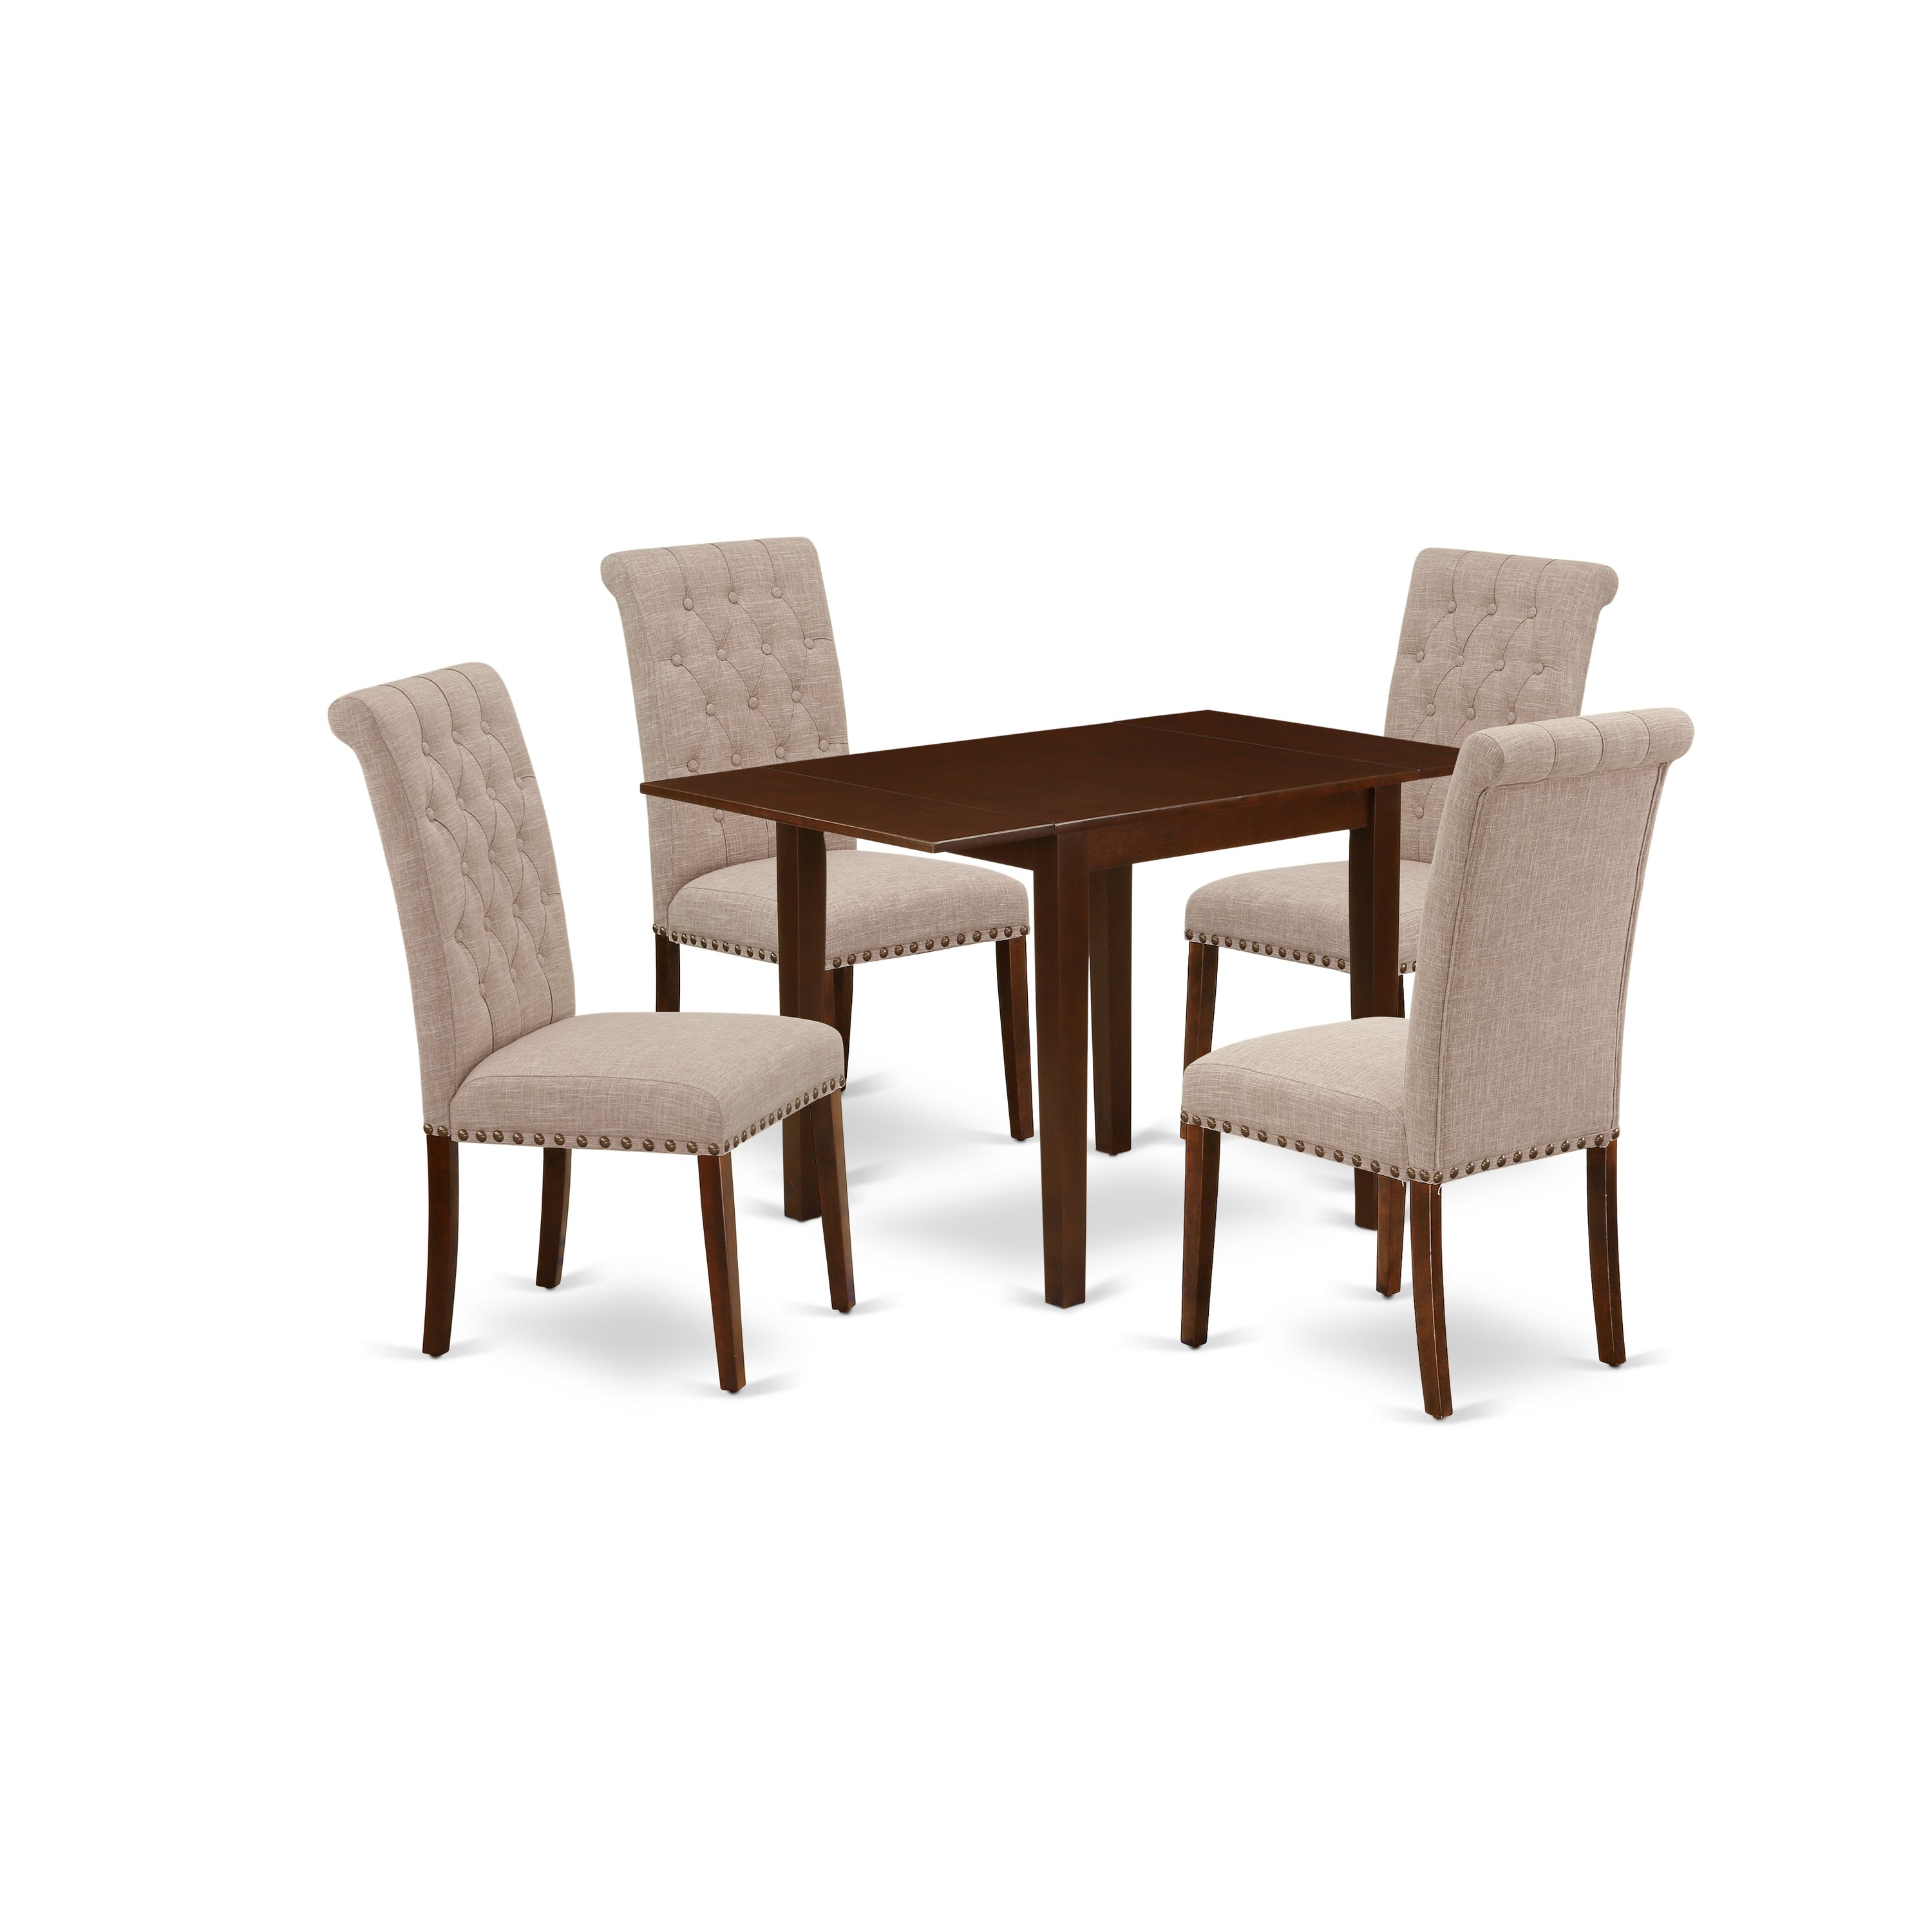 East West Furniture NDBR5-MAH-04 Dinette Set 5 Pc – Four Kitchen Chairs and a Dining Room Table - Mahogany Finish Wood - Light Fawn Color Linen Fabric